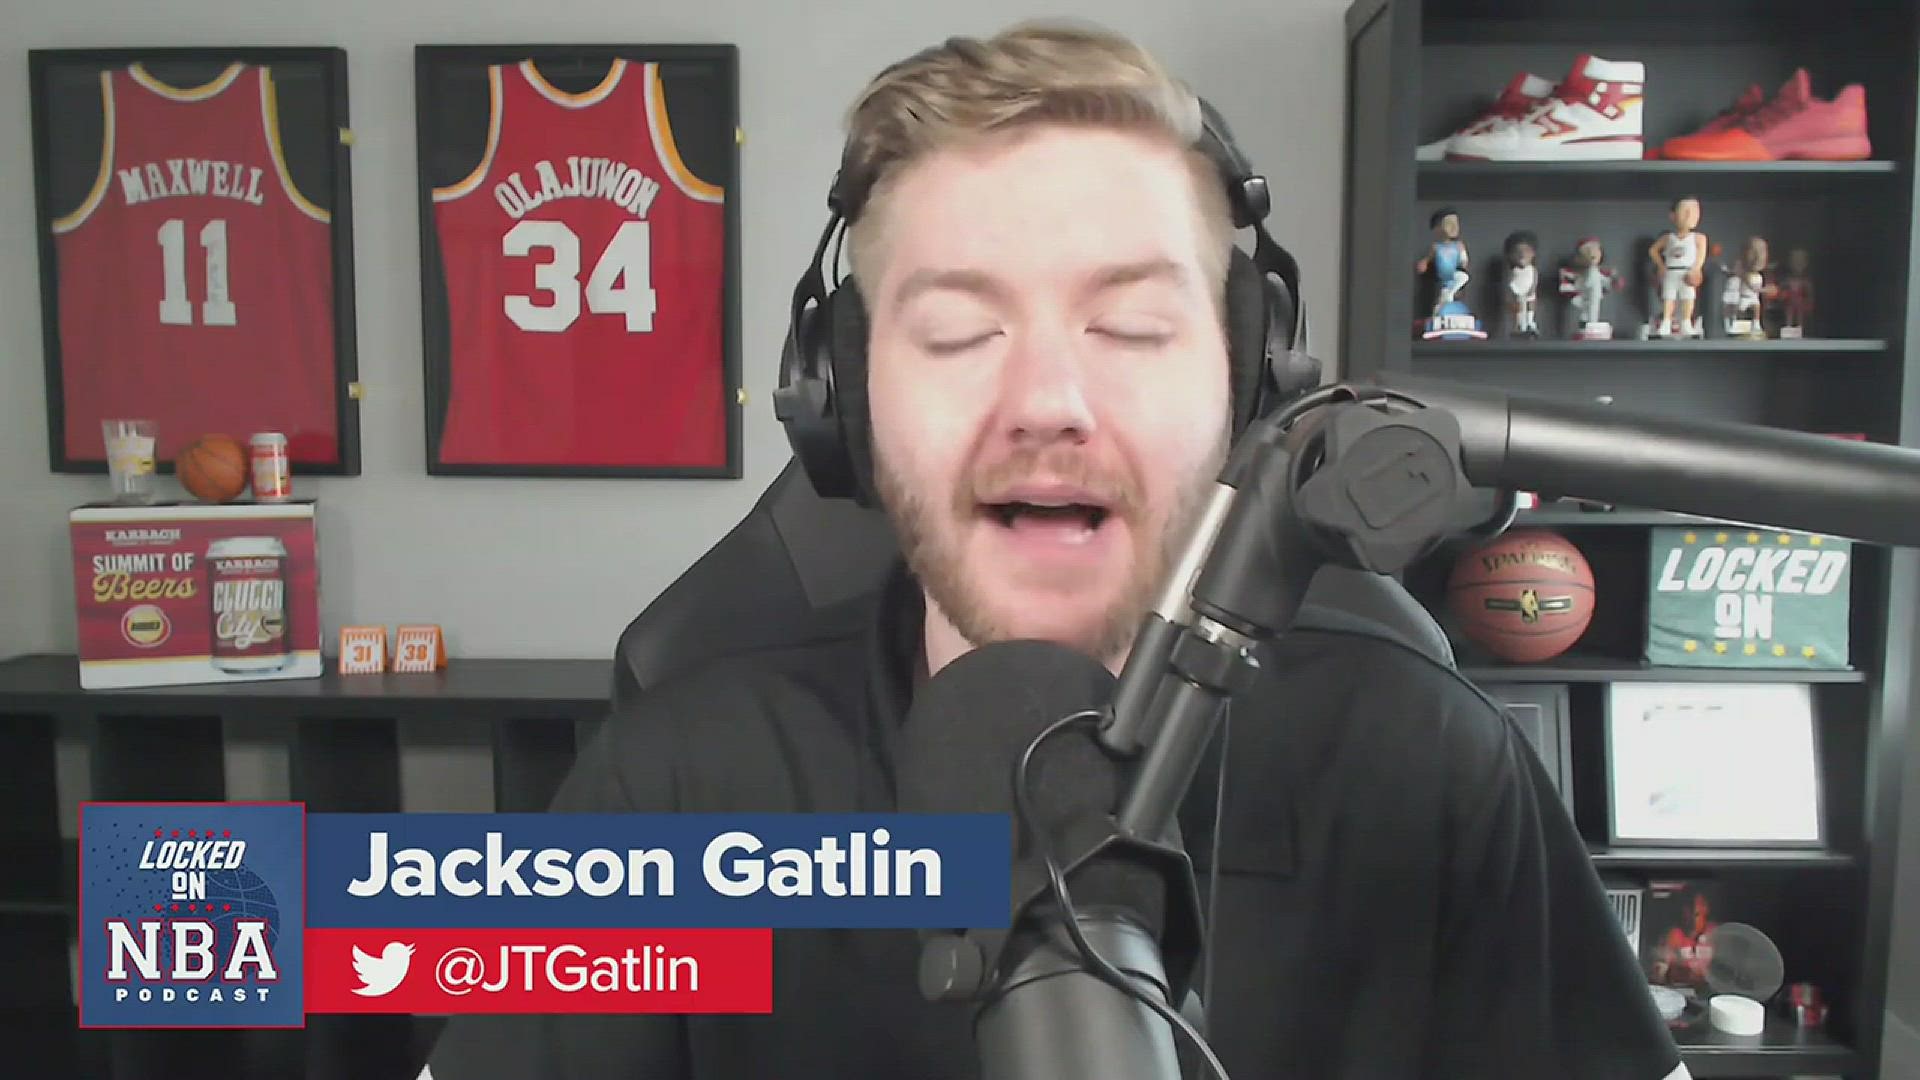 Jackson Gatlin is joined by Doug Norrie to discuss latest rumors and best outcome of the Brooklyn Nets situation with Kevin Durant.